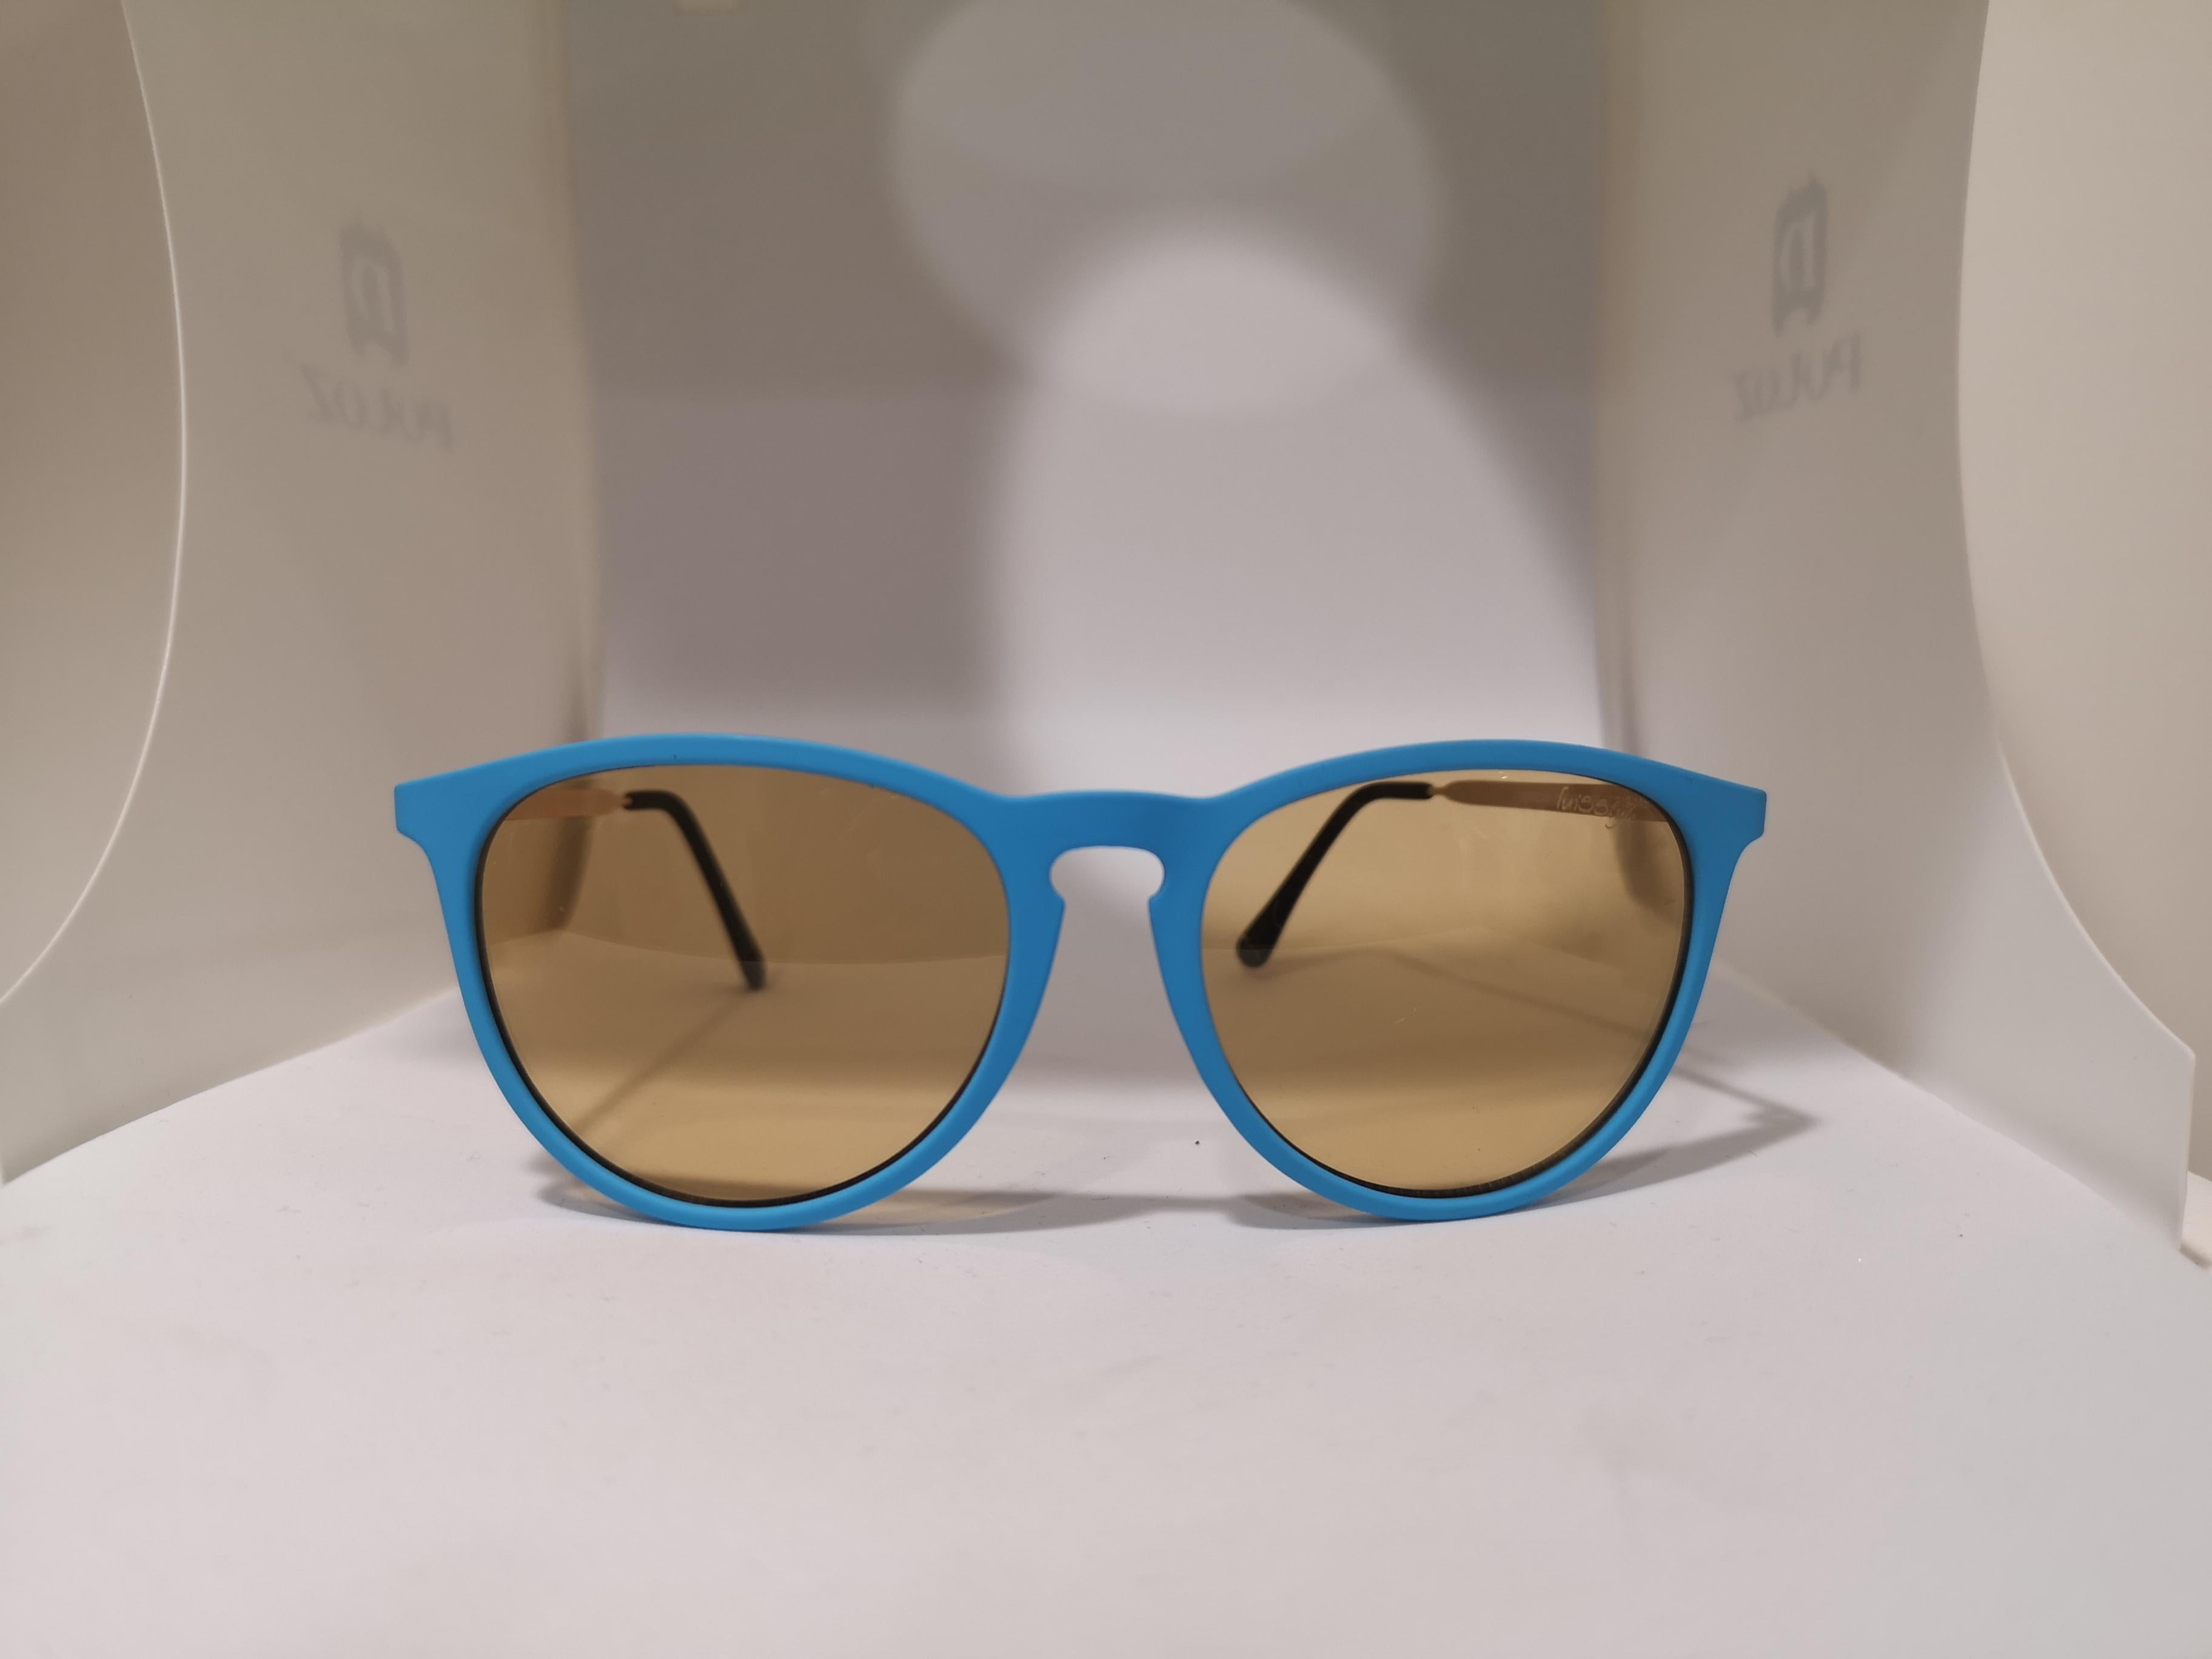 Luisstyle blue light orange lens sunglasses
NWOT but comes without box